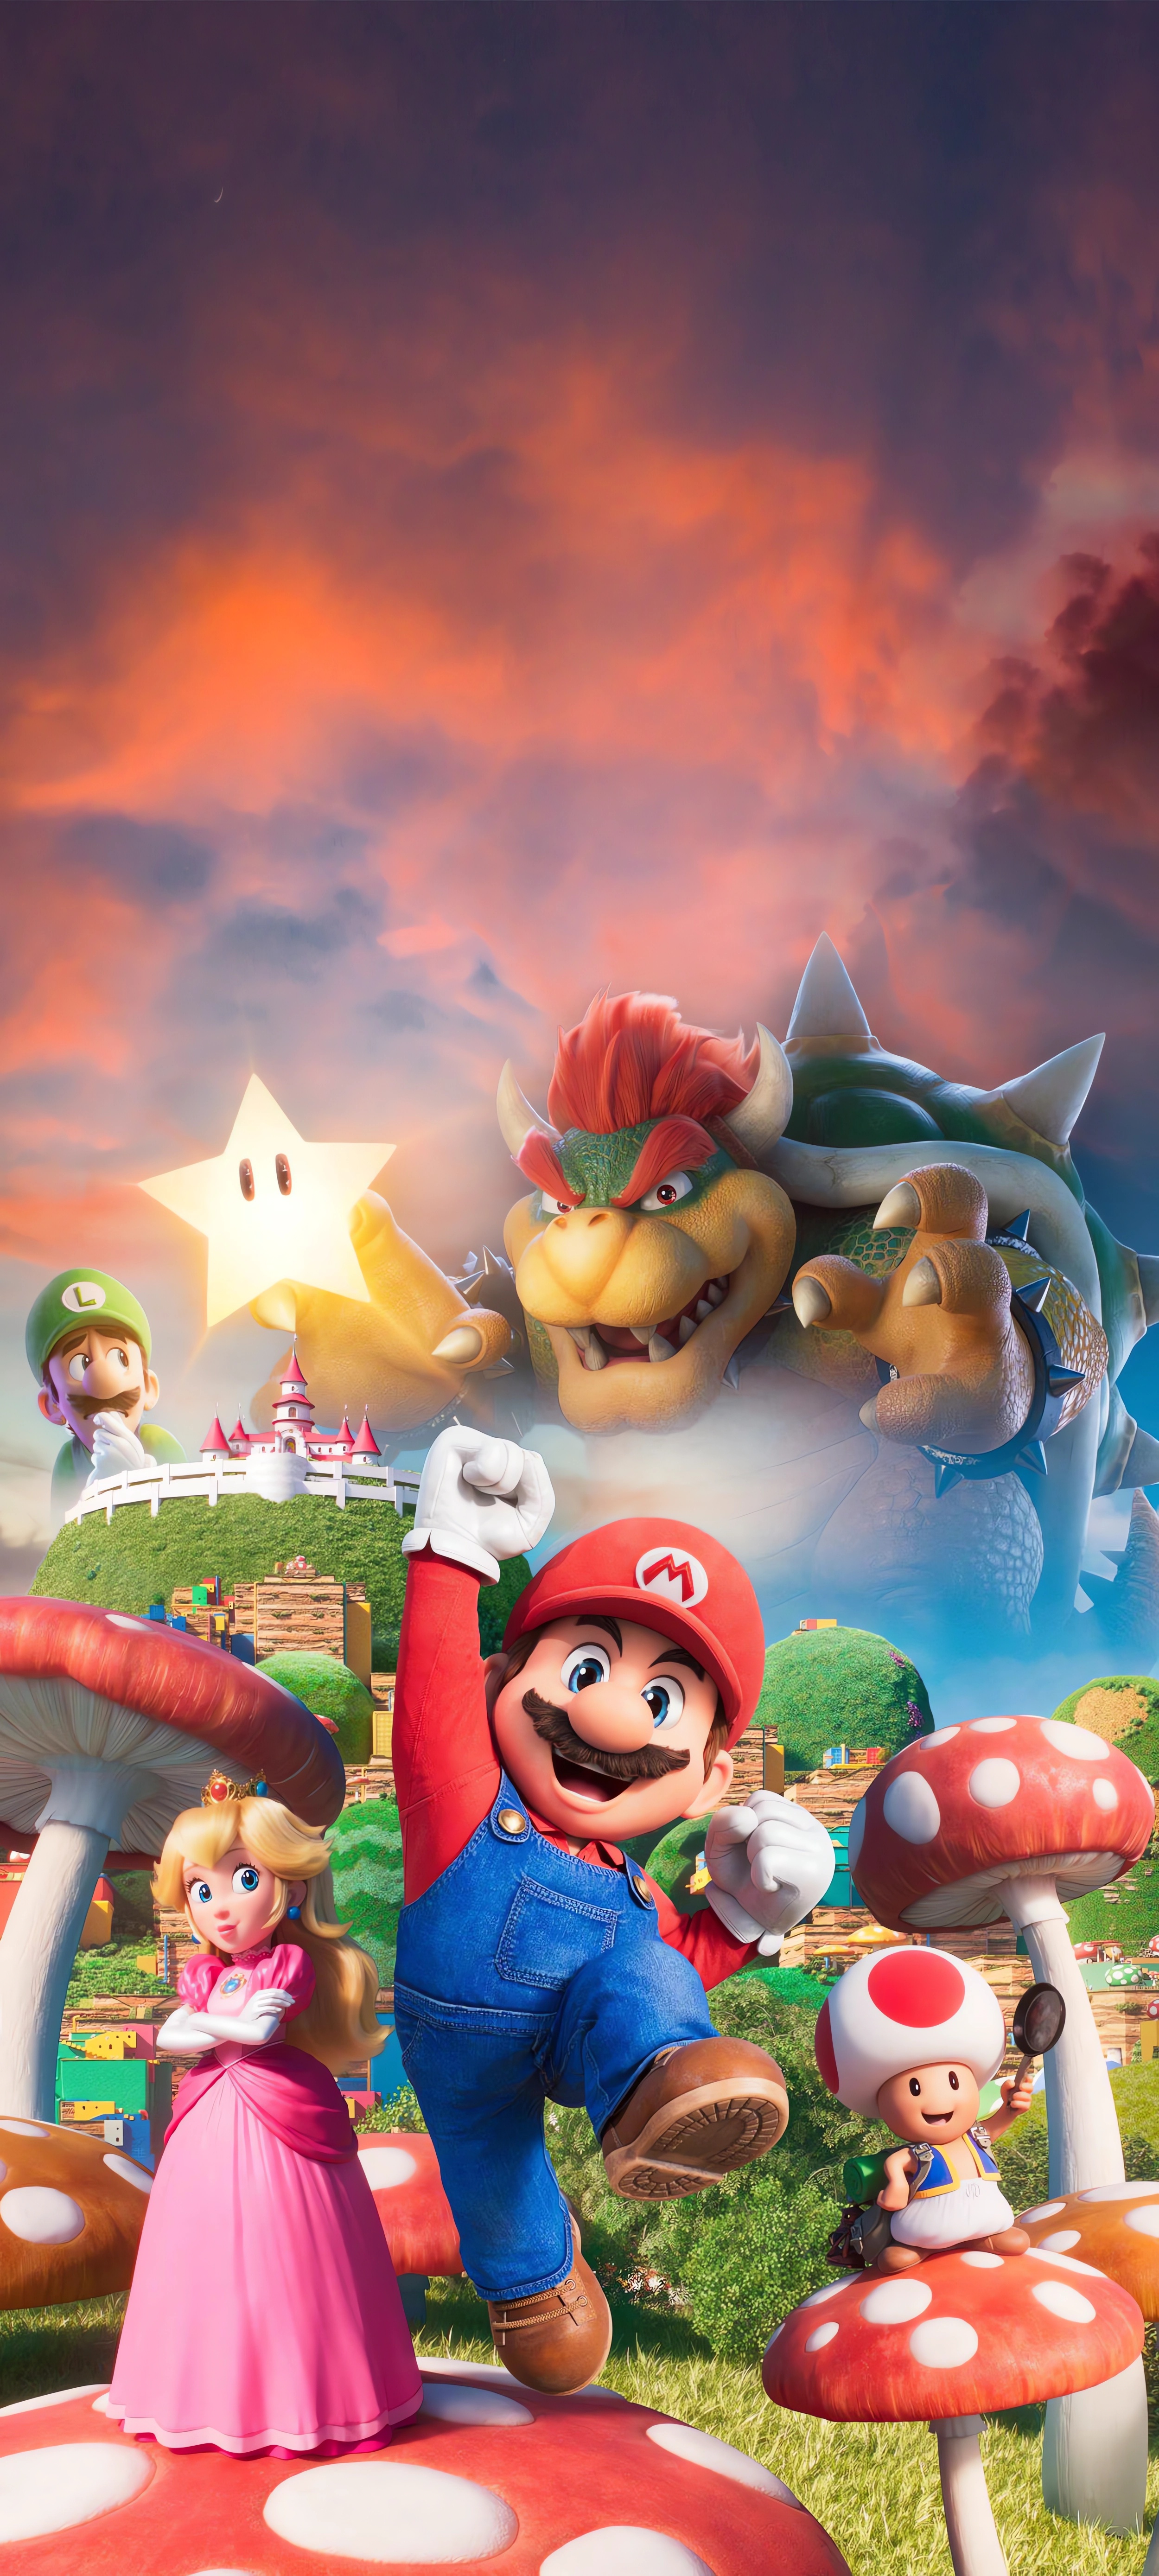 Iphone 14 Pro Max Dynamic Island  Super Mario with a hammer Wallpaper  Download  MobCup